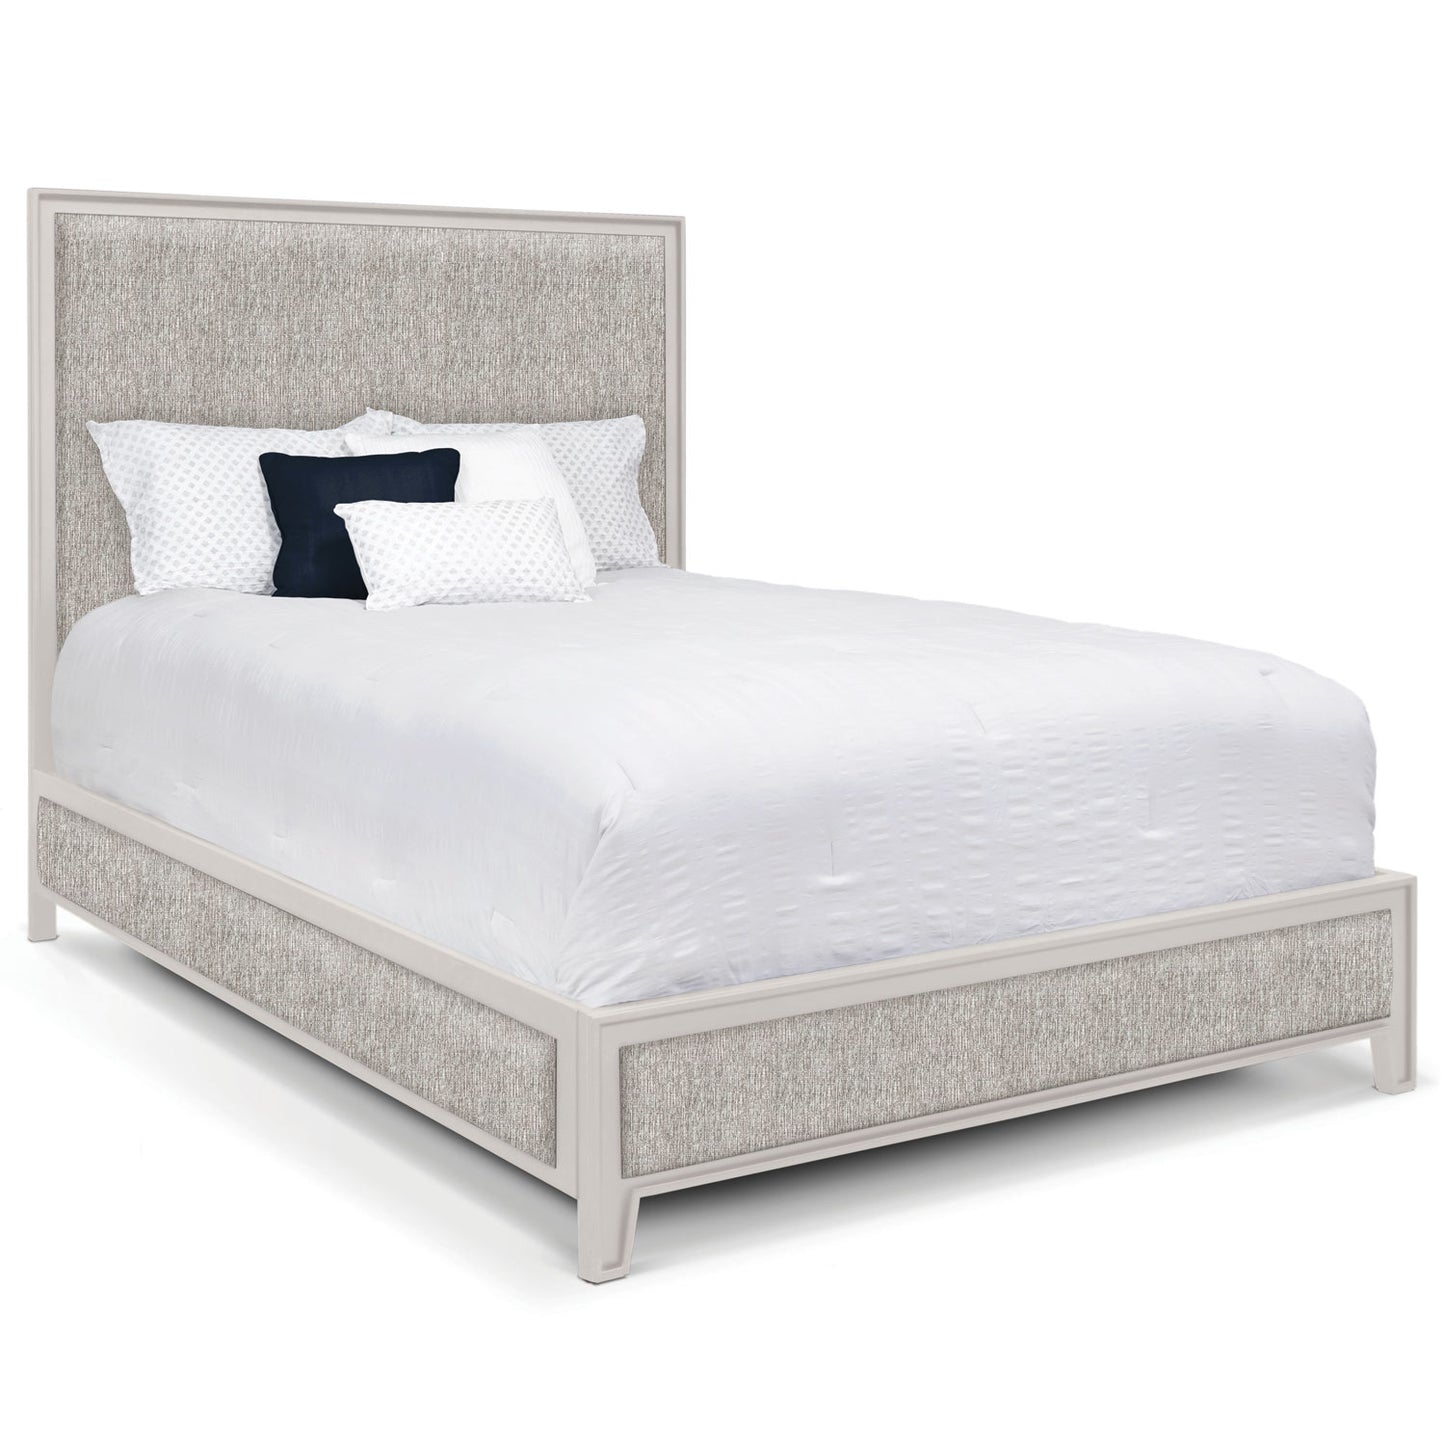 Aven Upholstered Iron Bed 1229 Wesley Allen Queen HBFS Matte White Finish Natural Oak Fabric Matriae